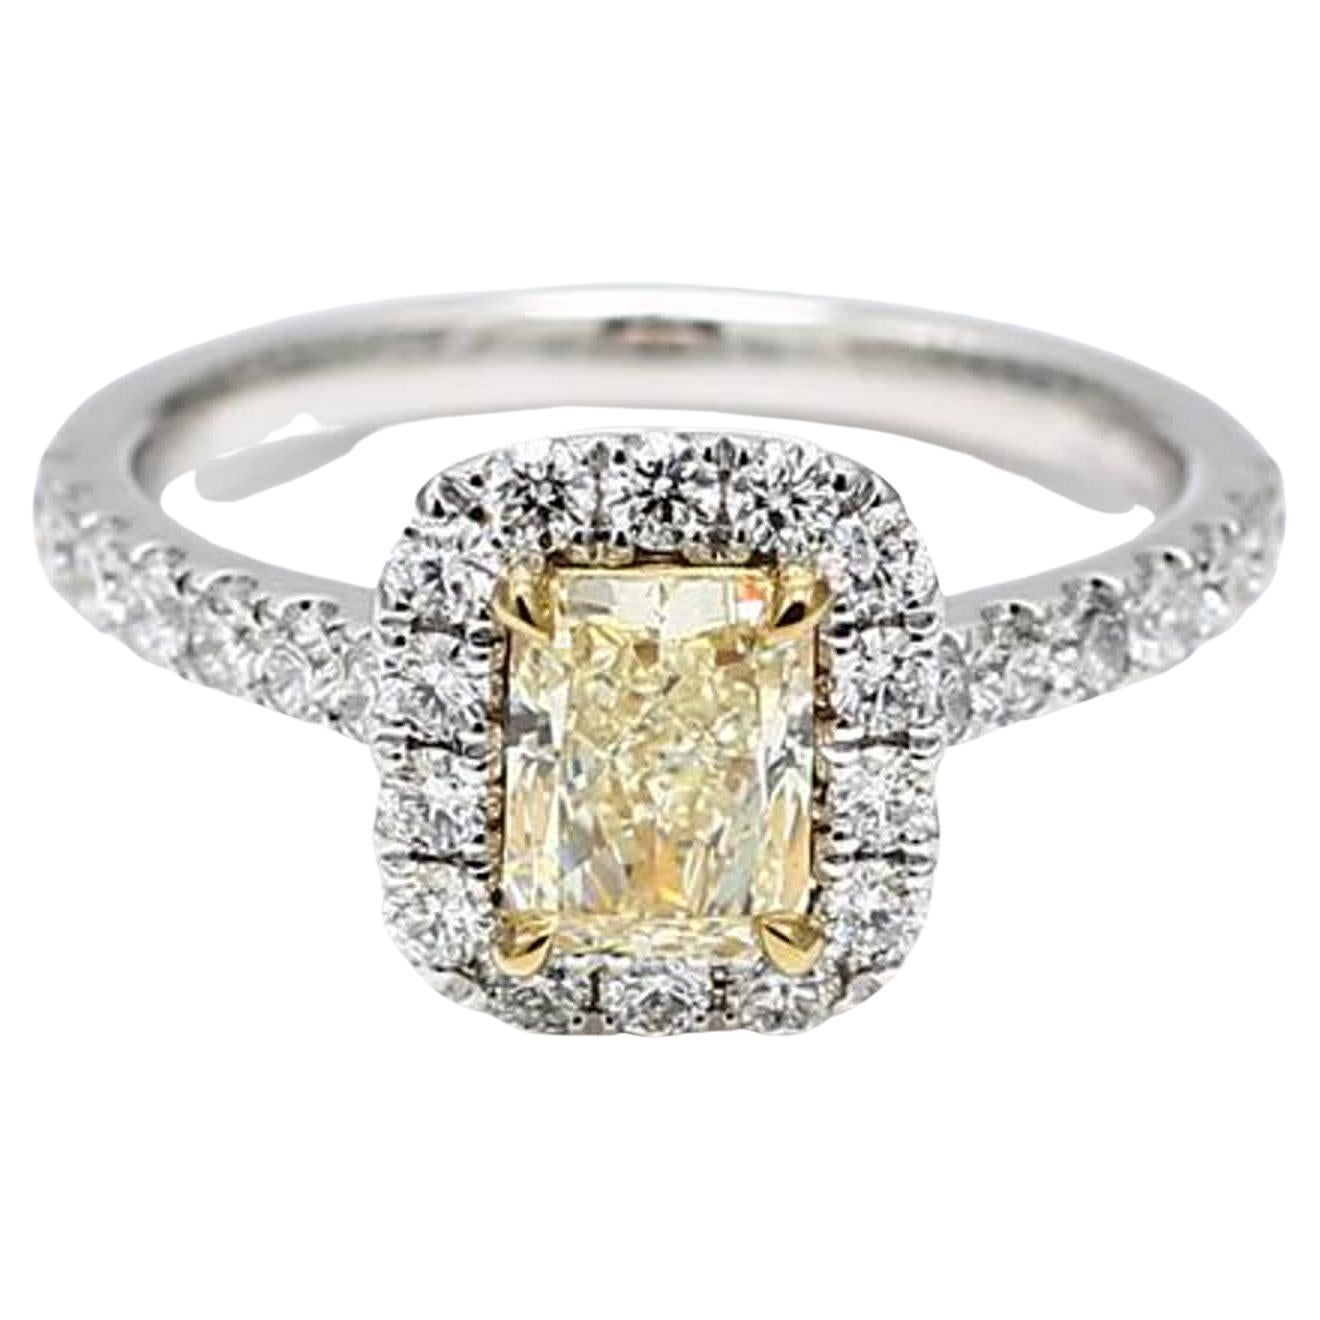 1.68 Carat Diamond and Sapphire Target Ring Platinum and Yellow Gold at ...